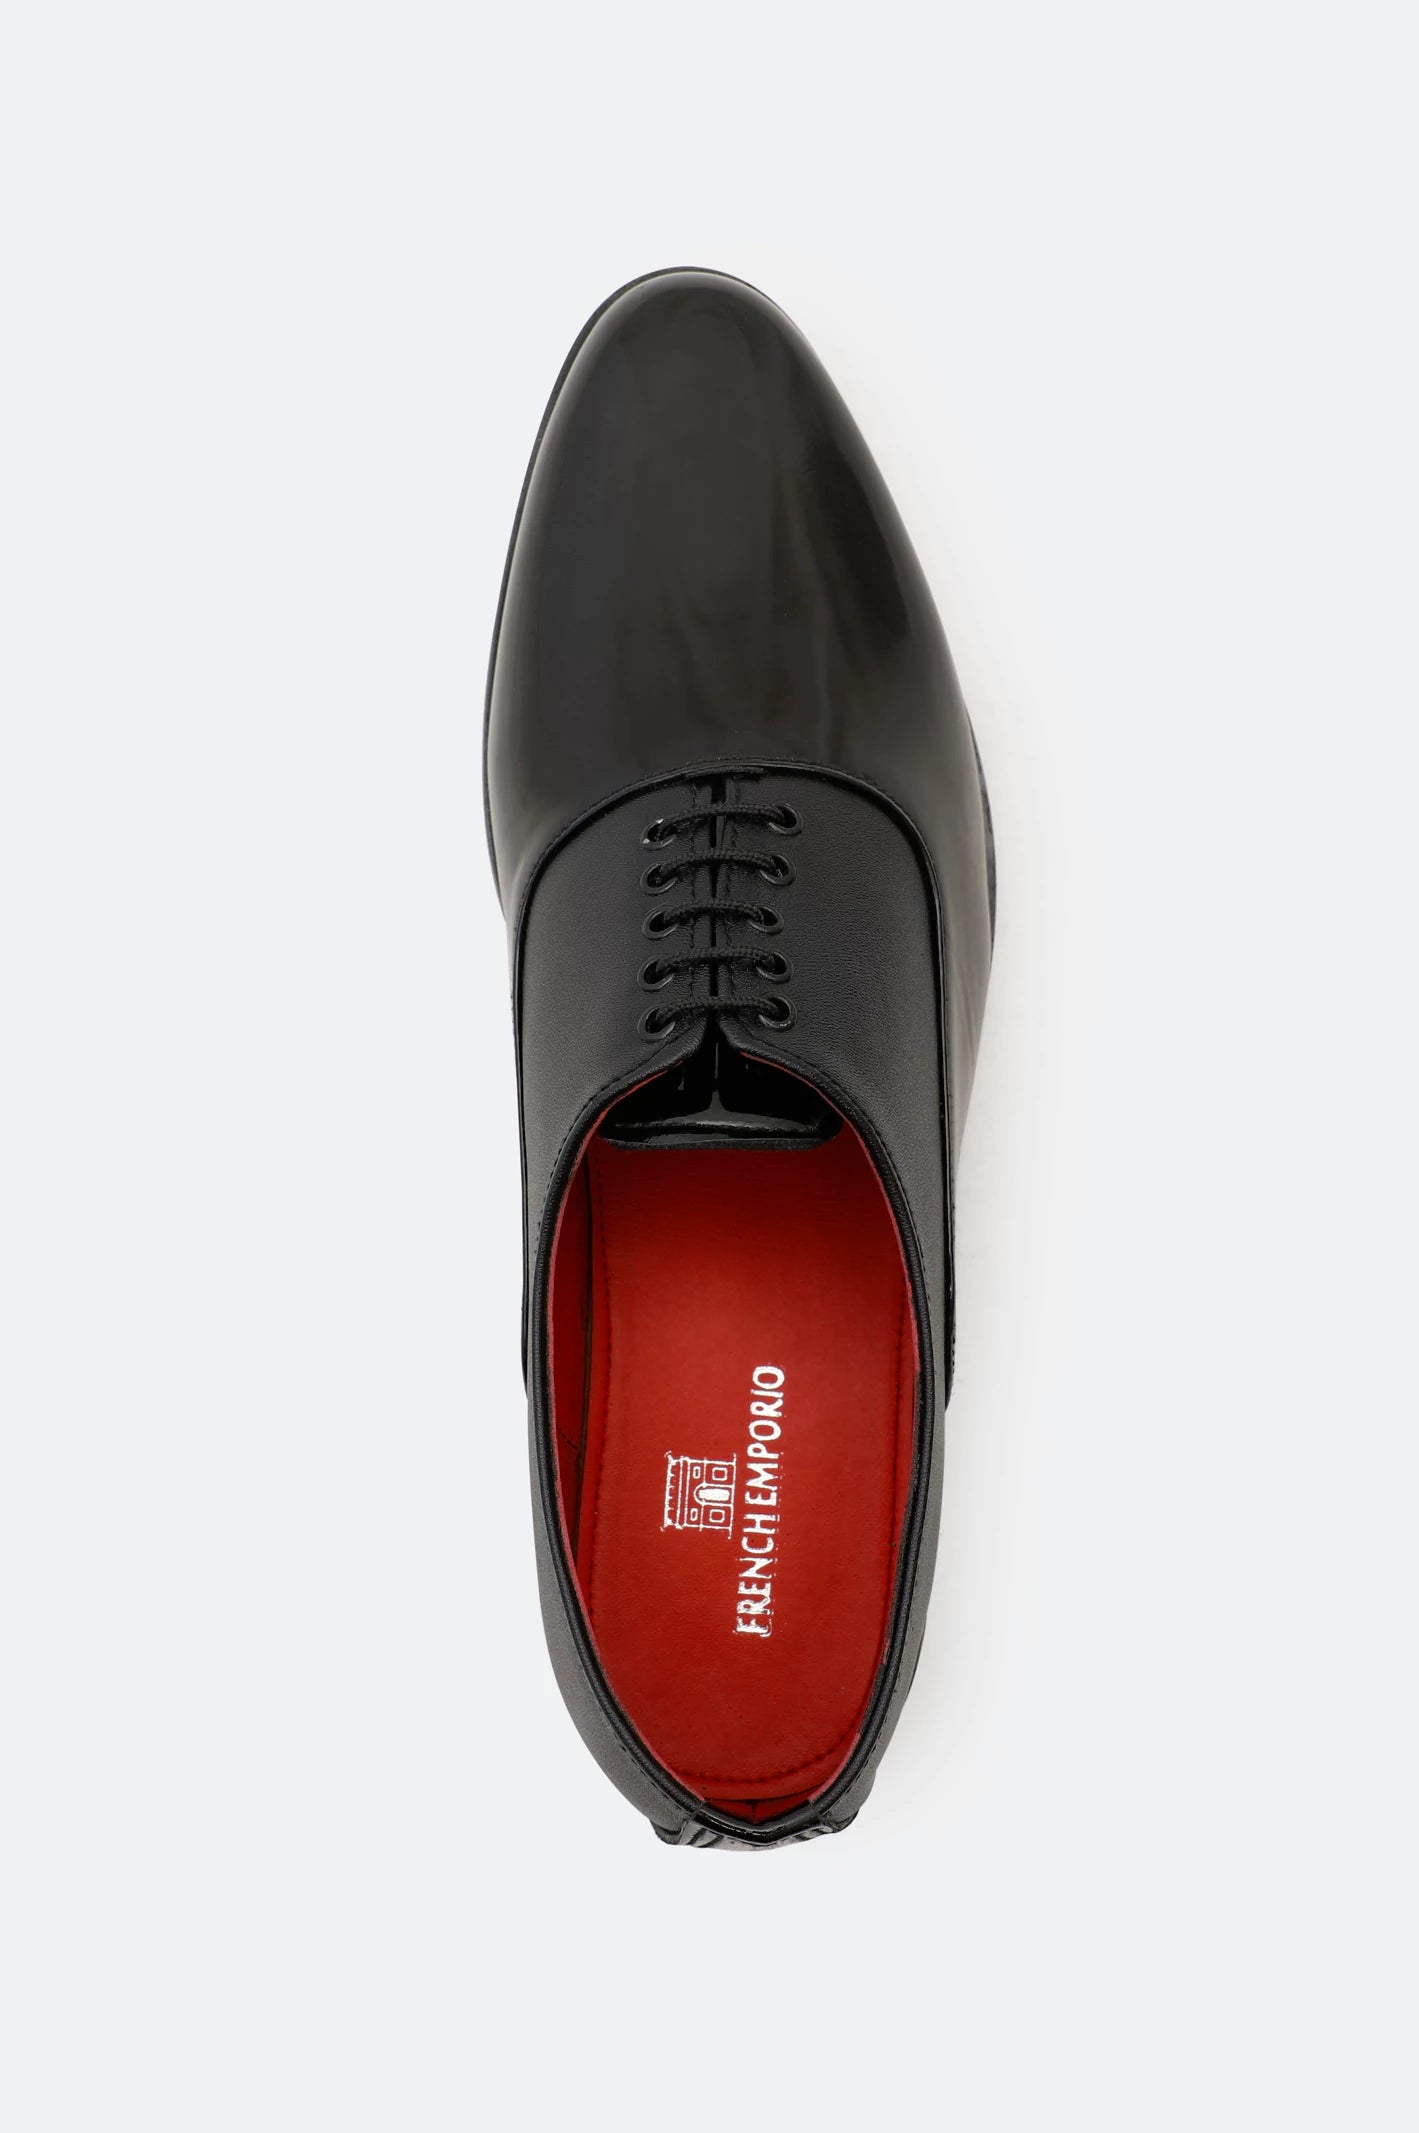 Black Formal Oxford Shoes From Diners